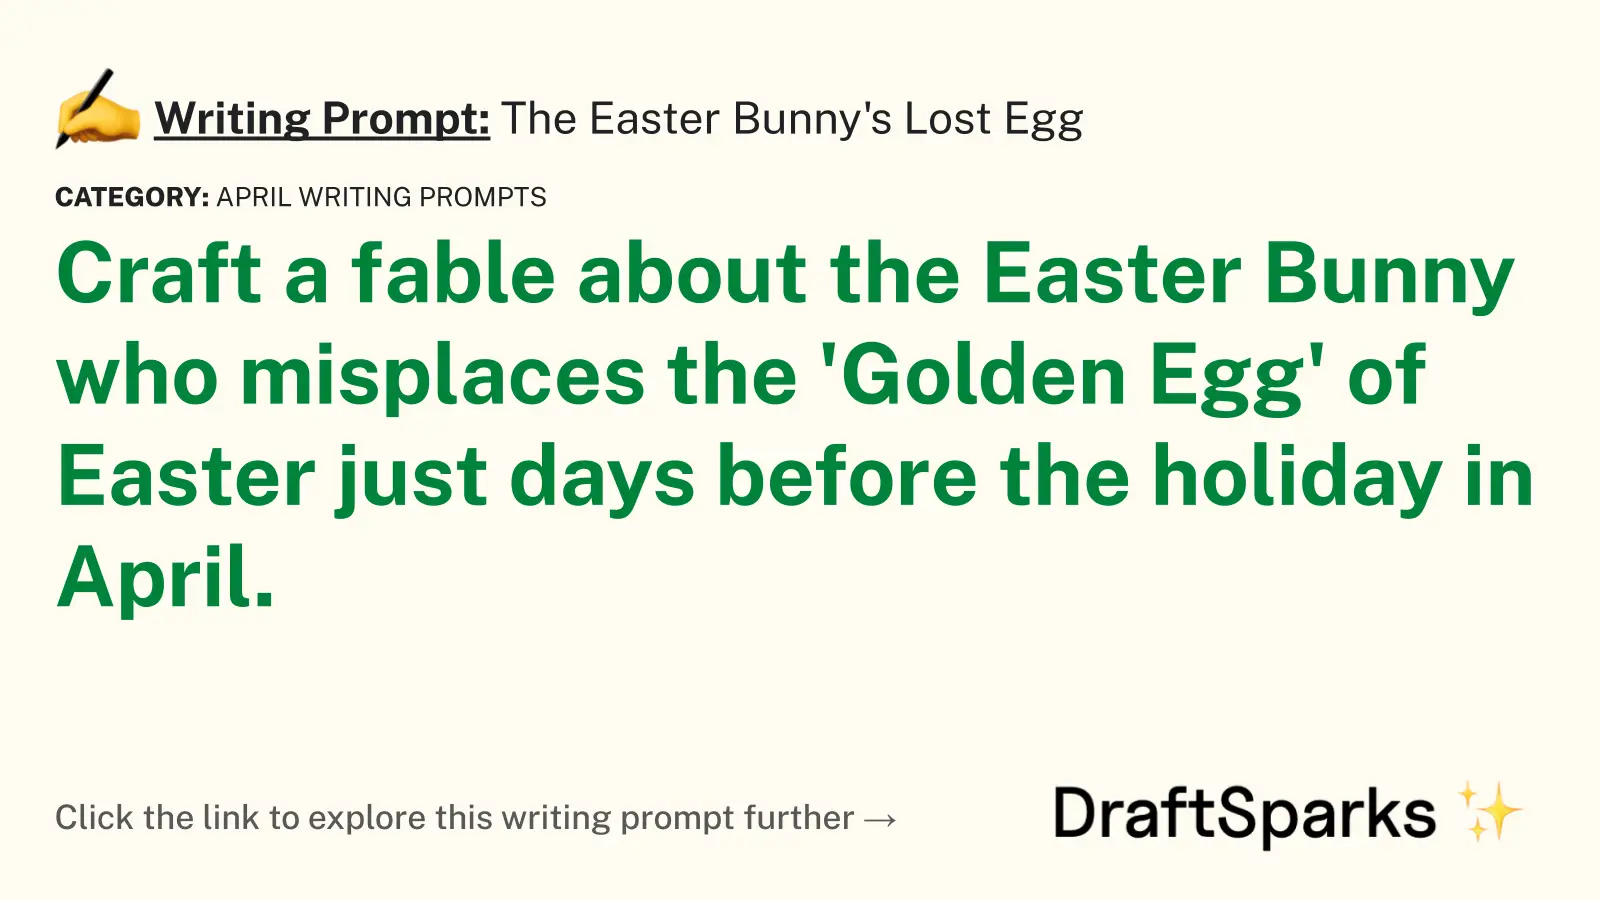 The Easter Bunny’s Lost Egg